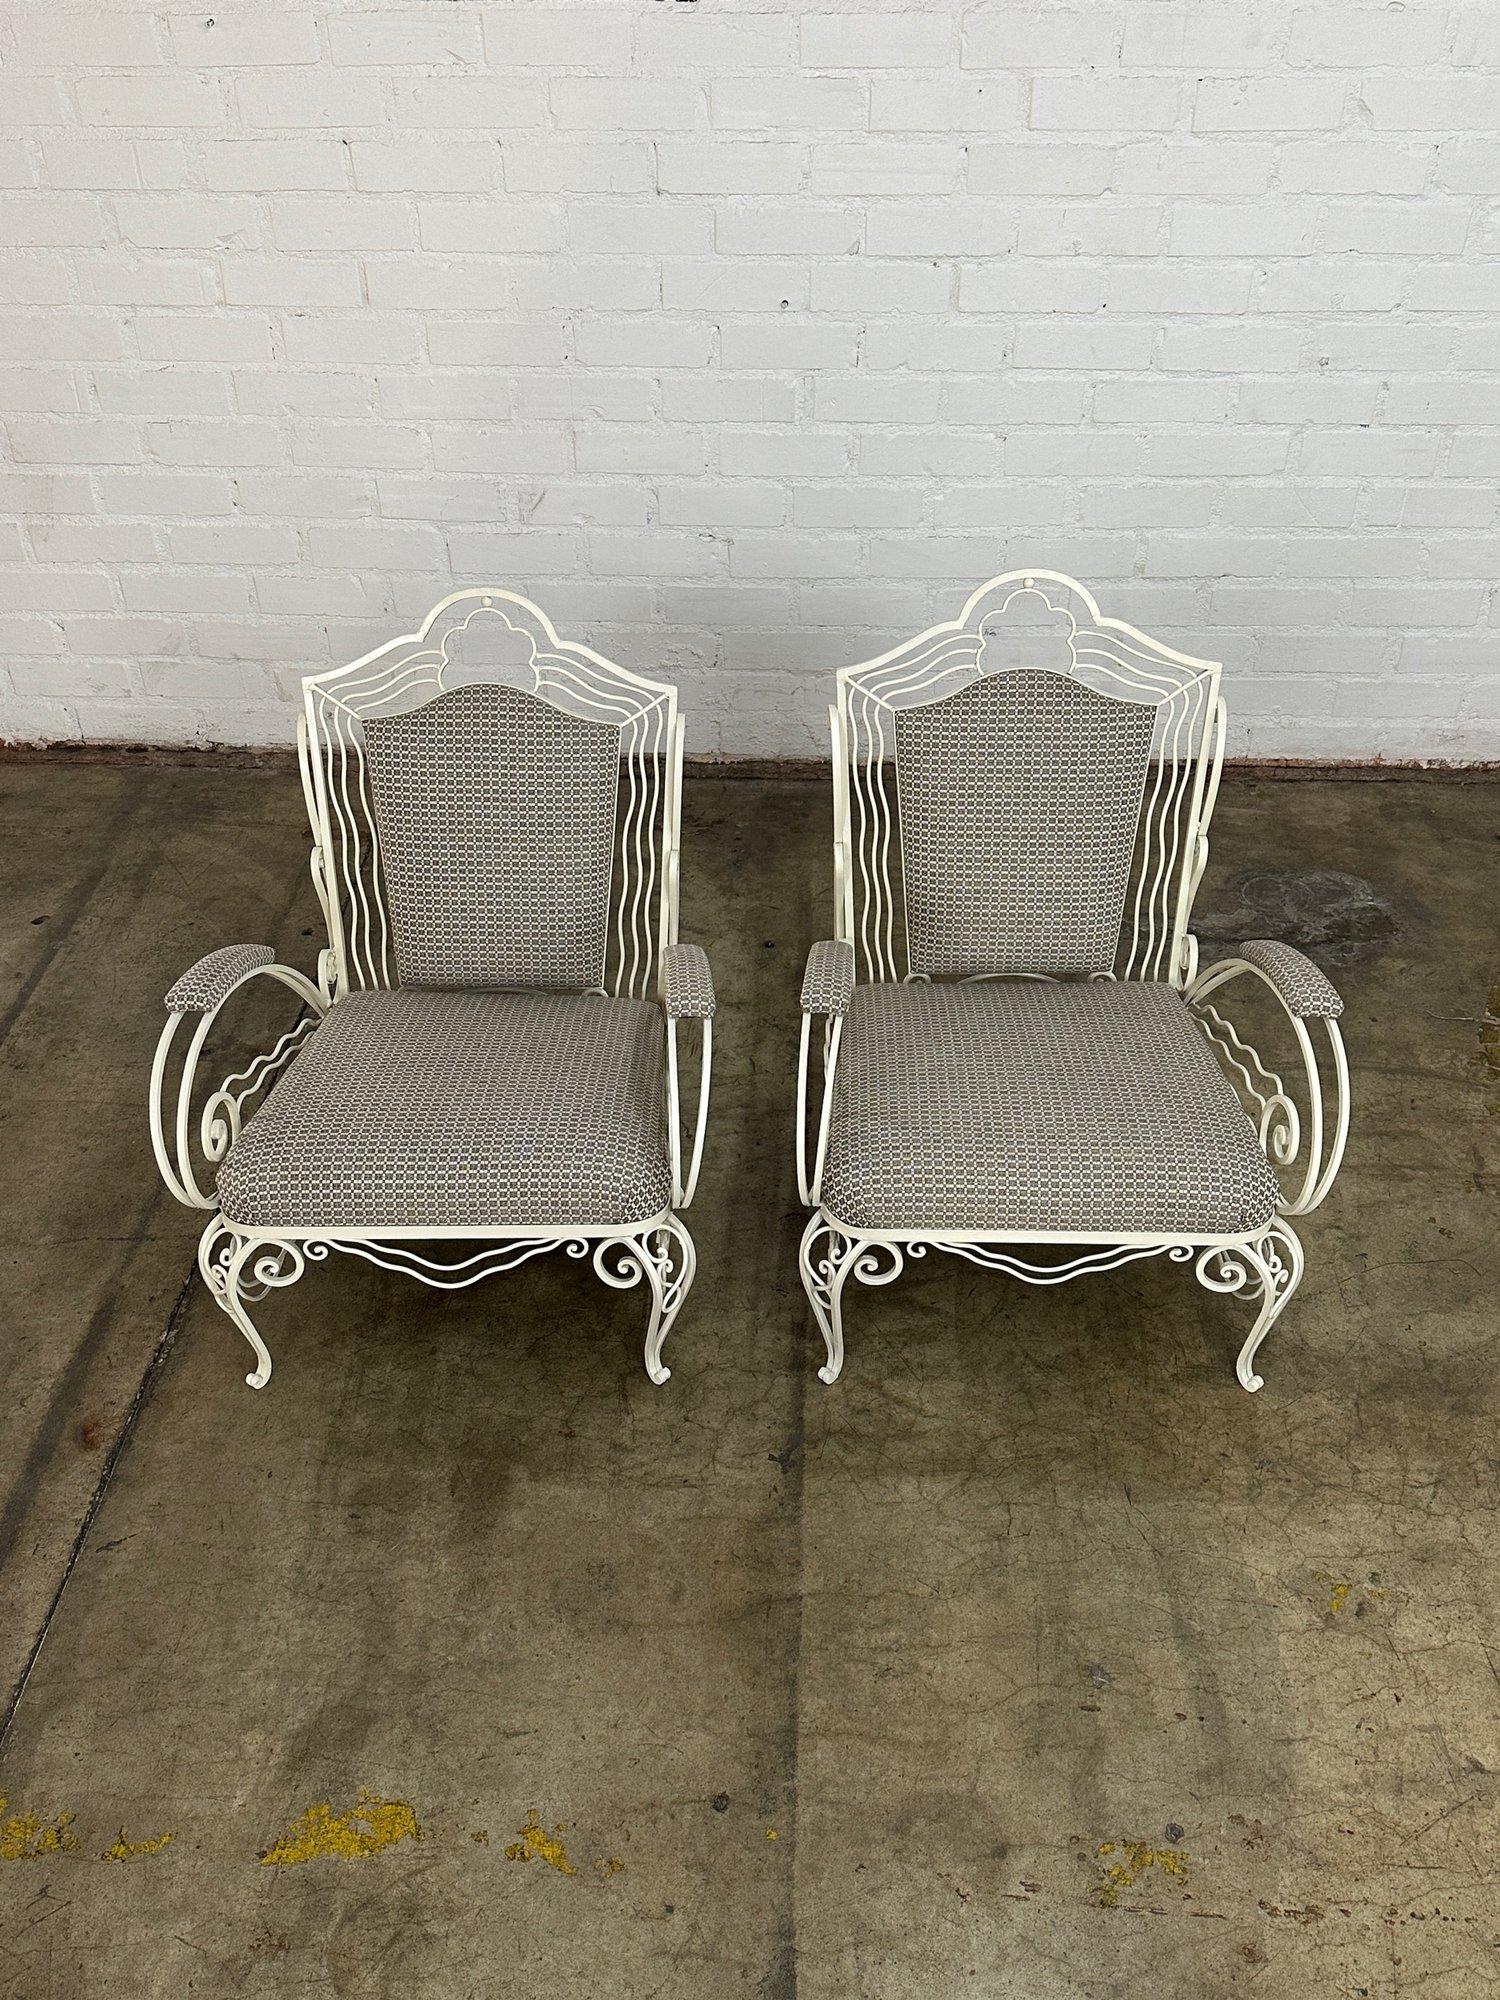 Restored French Iron chairs - Pair For Sale 13